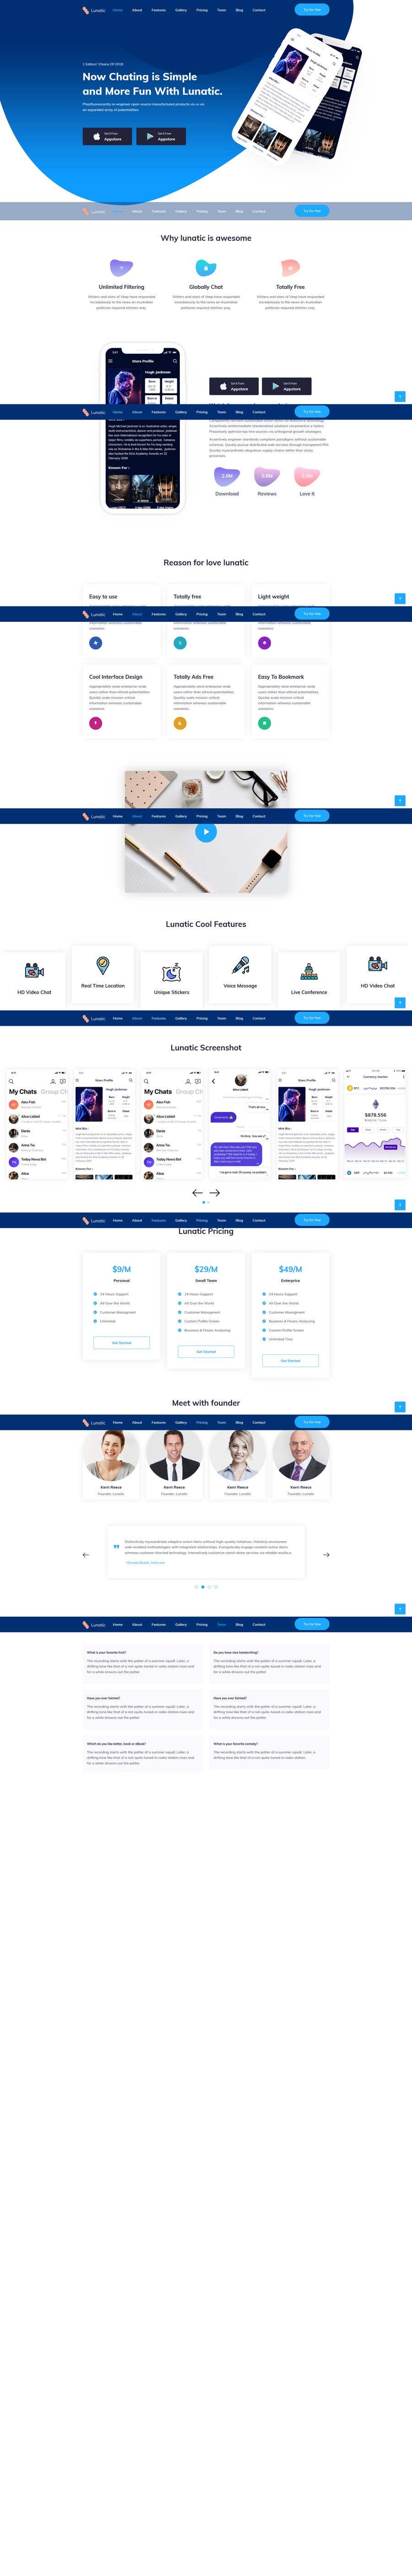 Contest Entry #11 for                                                 Design a Landing Page / Splash page for my mobile app going to ICO
                                            